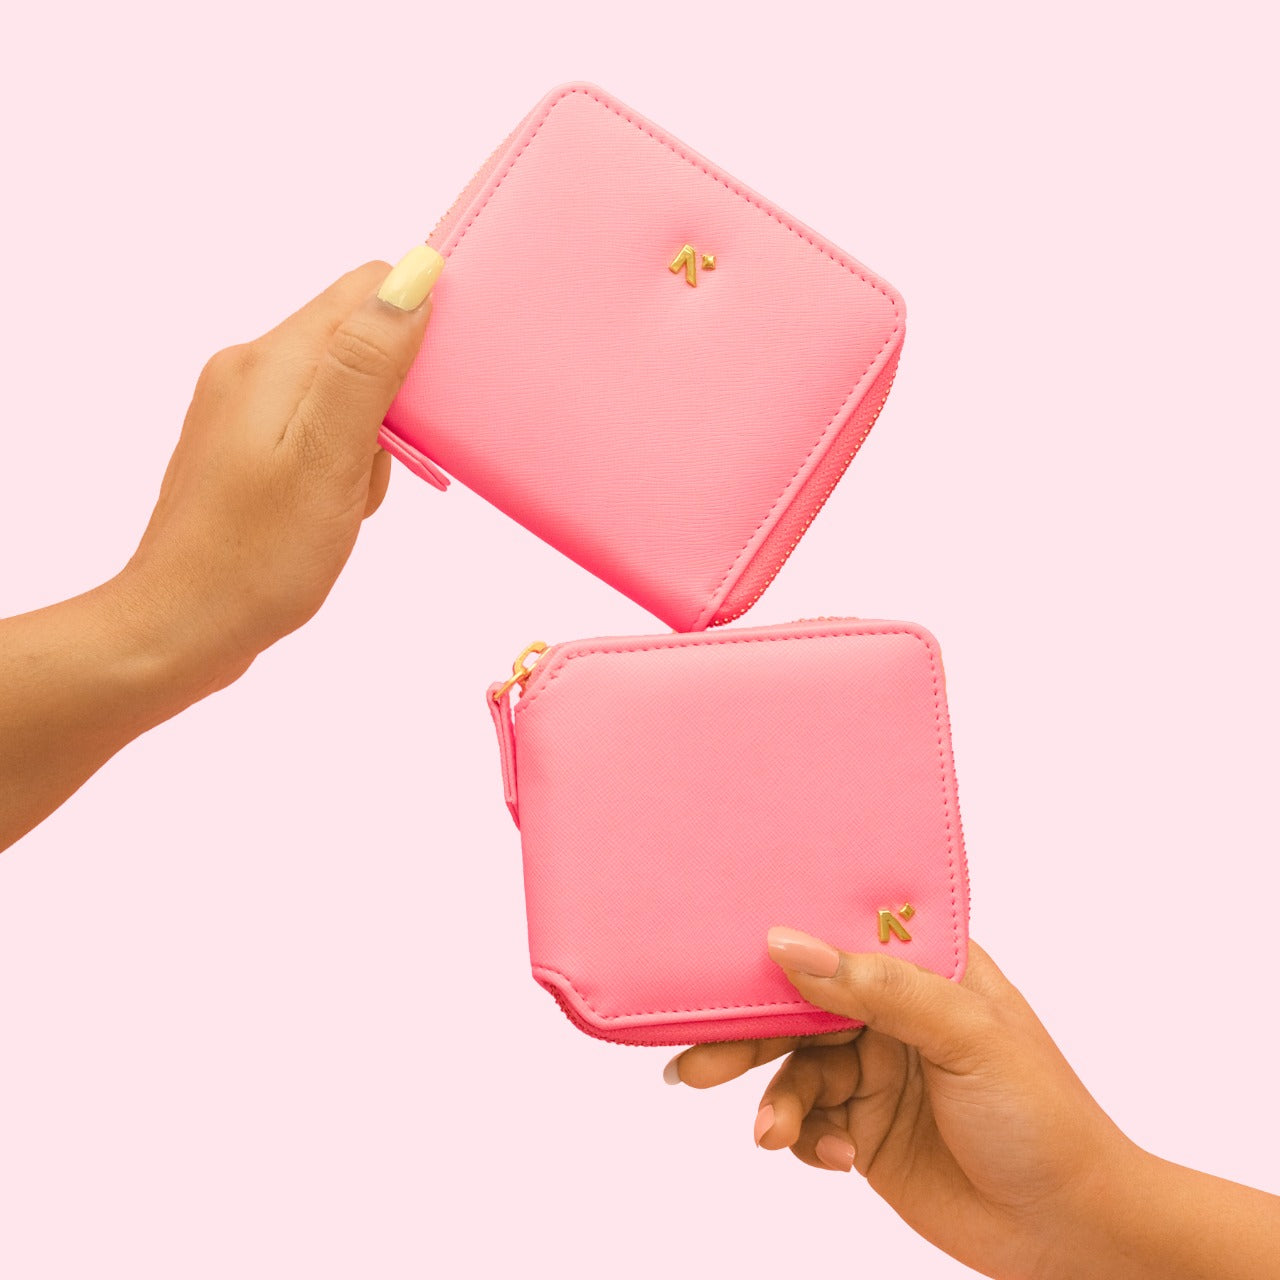 SVELTE, The New Urbane Chic Wallet from the House of Neorah 